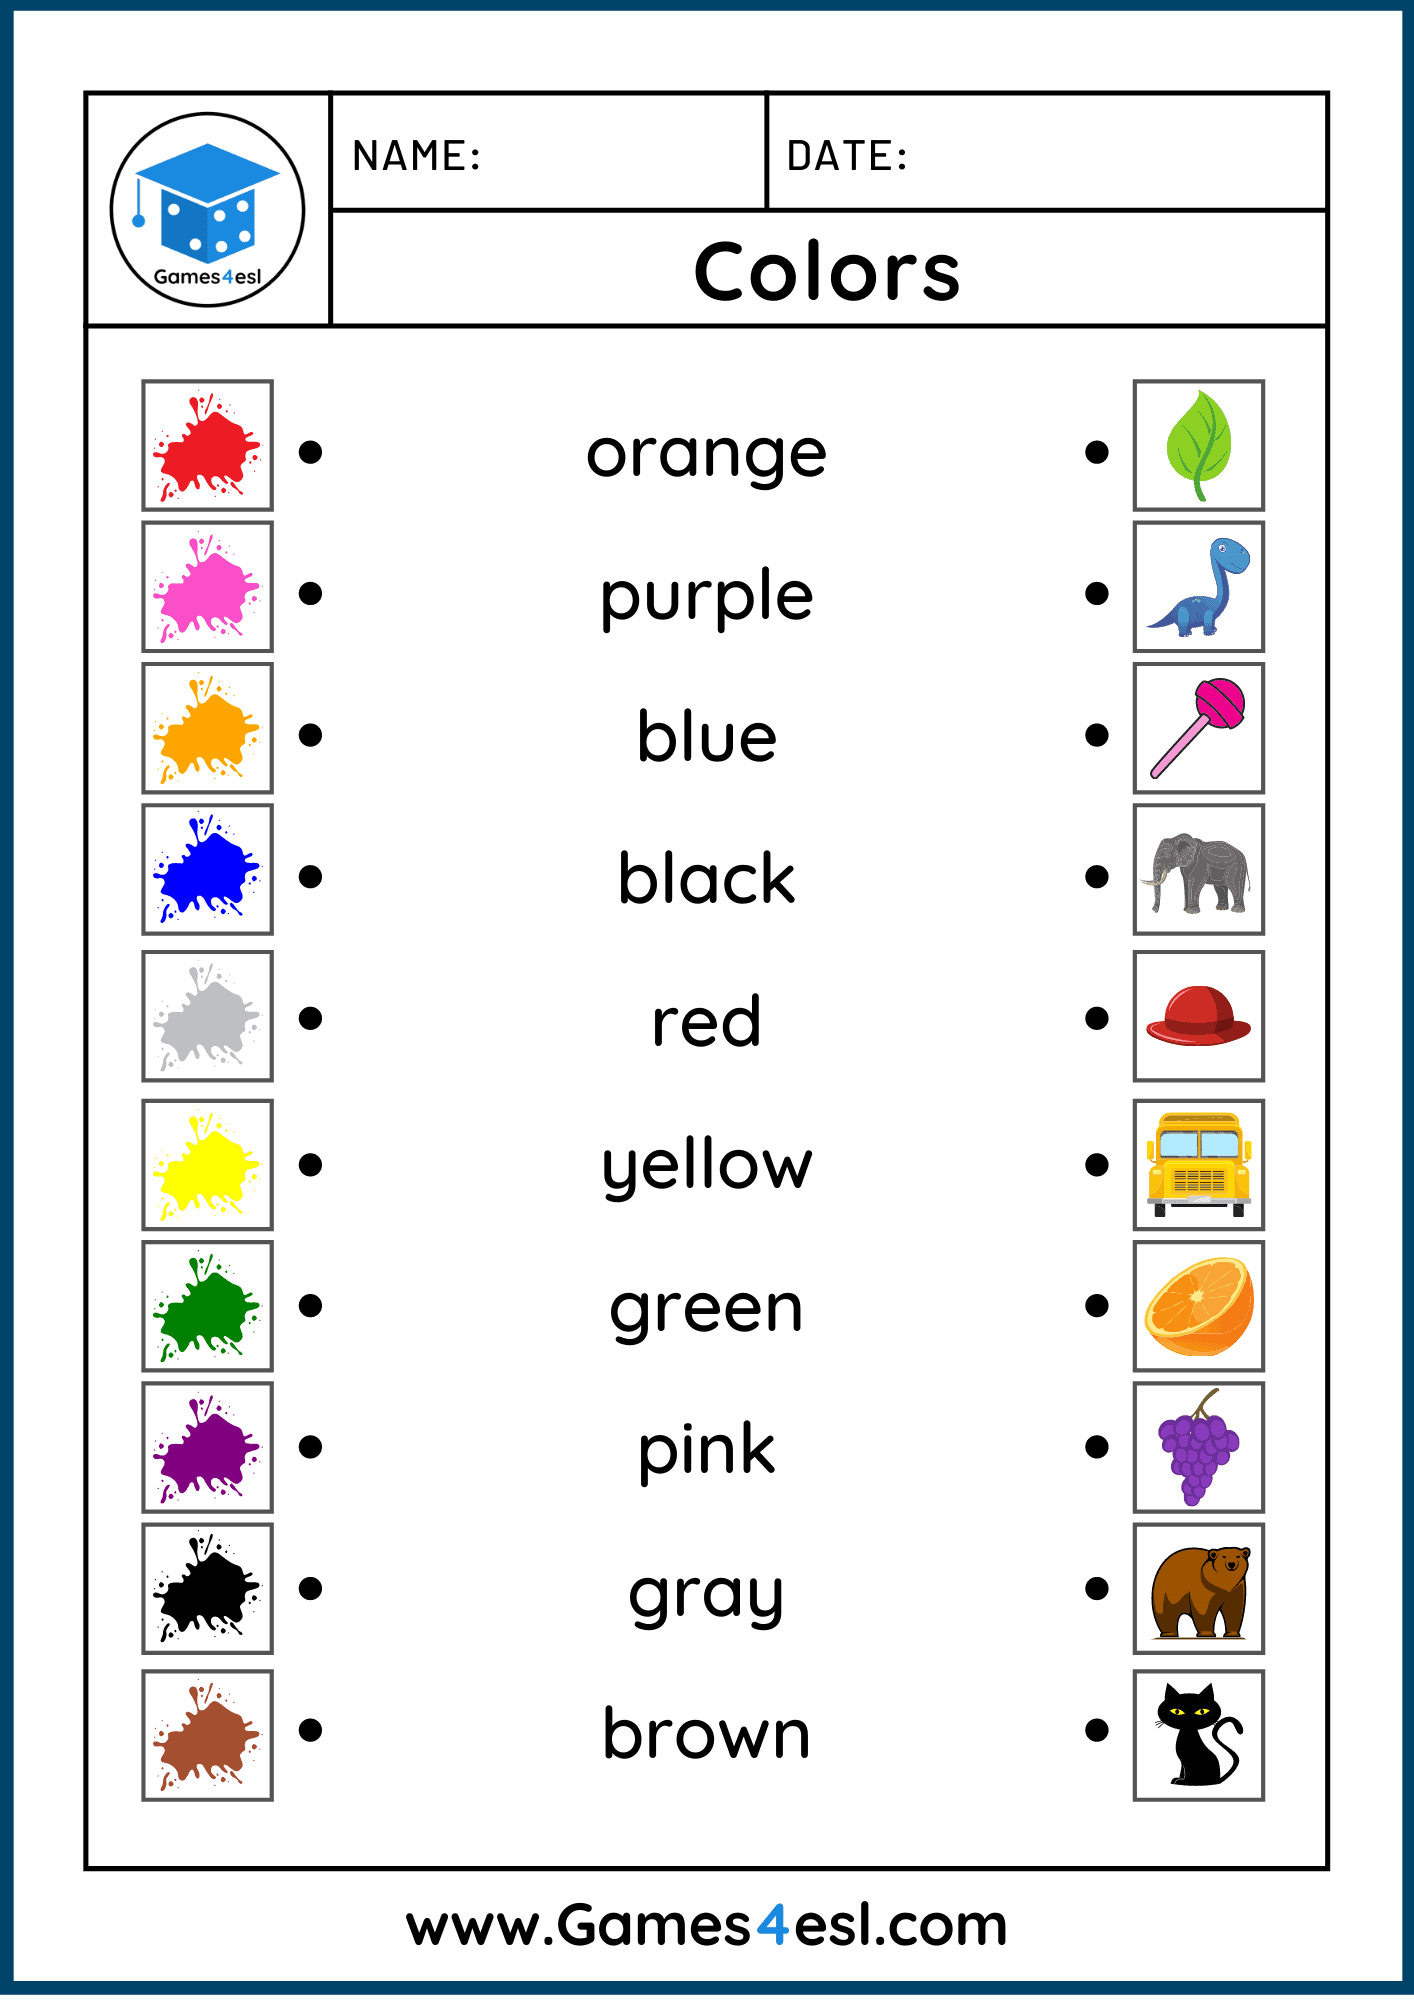 Colors Worksheets | Free Worksheets For Teaching Colors | Games4Esl inside Colors Worksheets For Preschoolers Free Printables